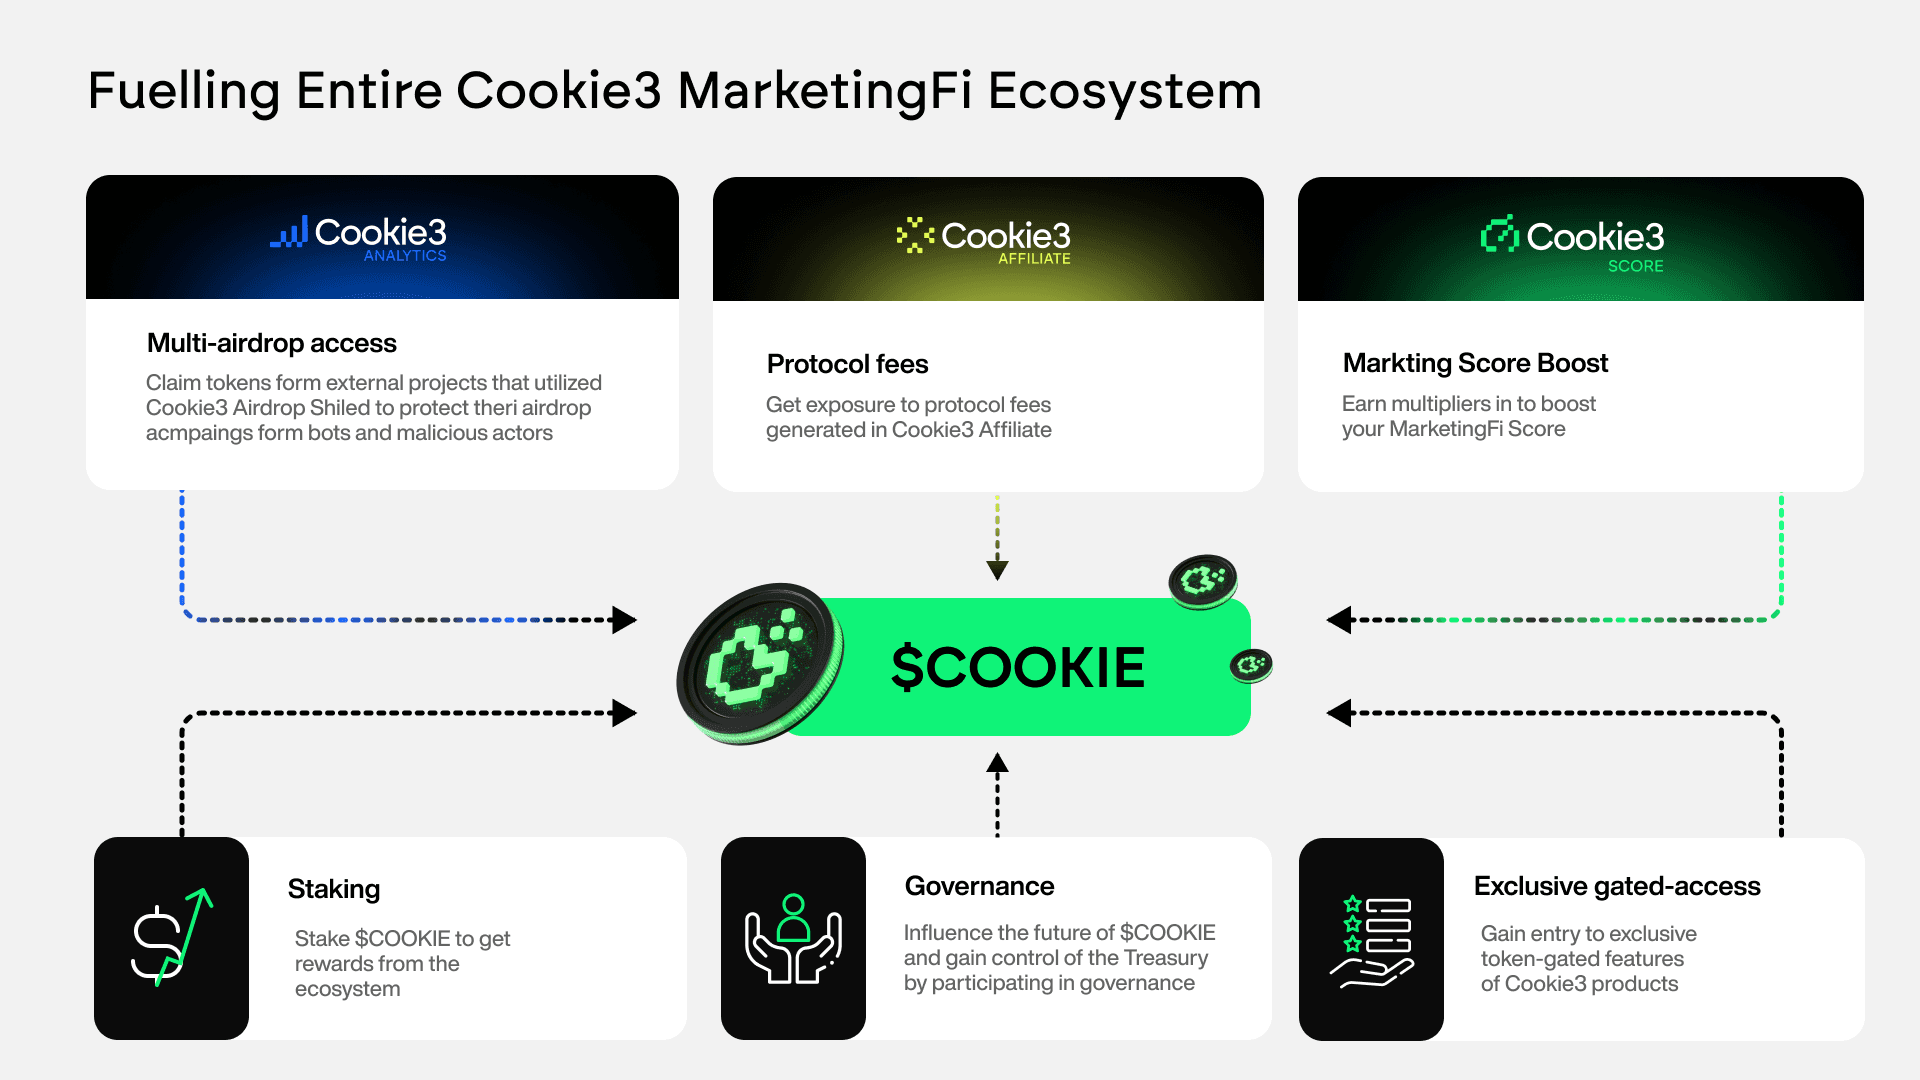 $COOKIE Image #4